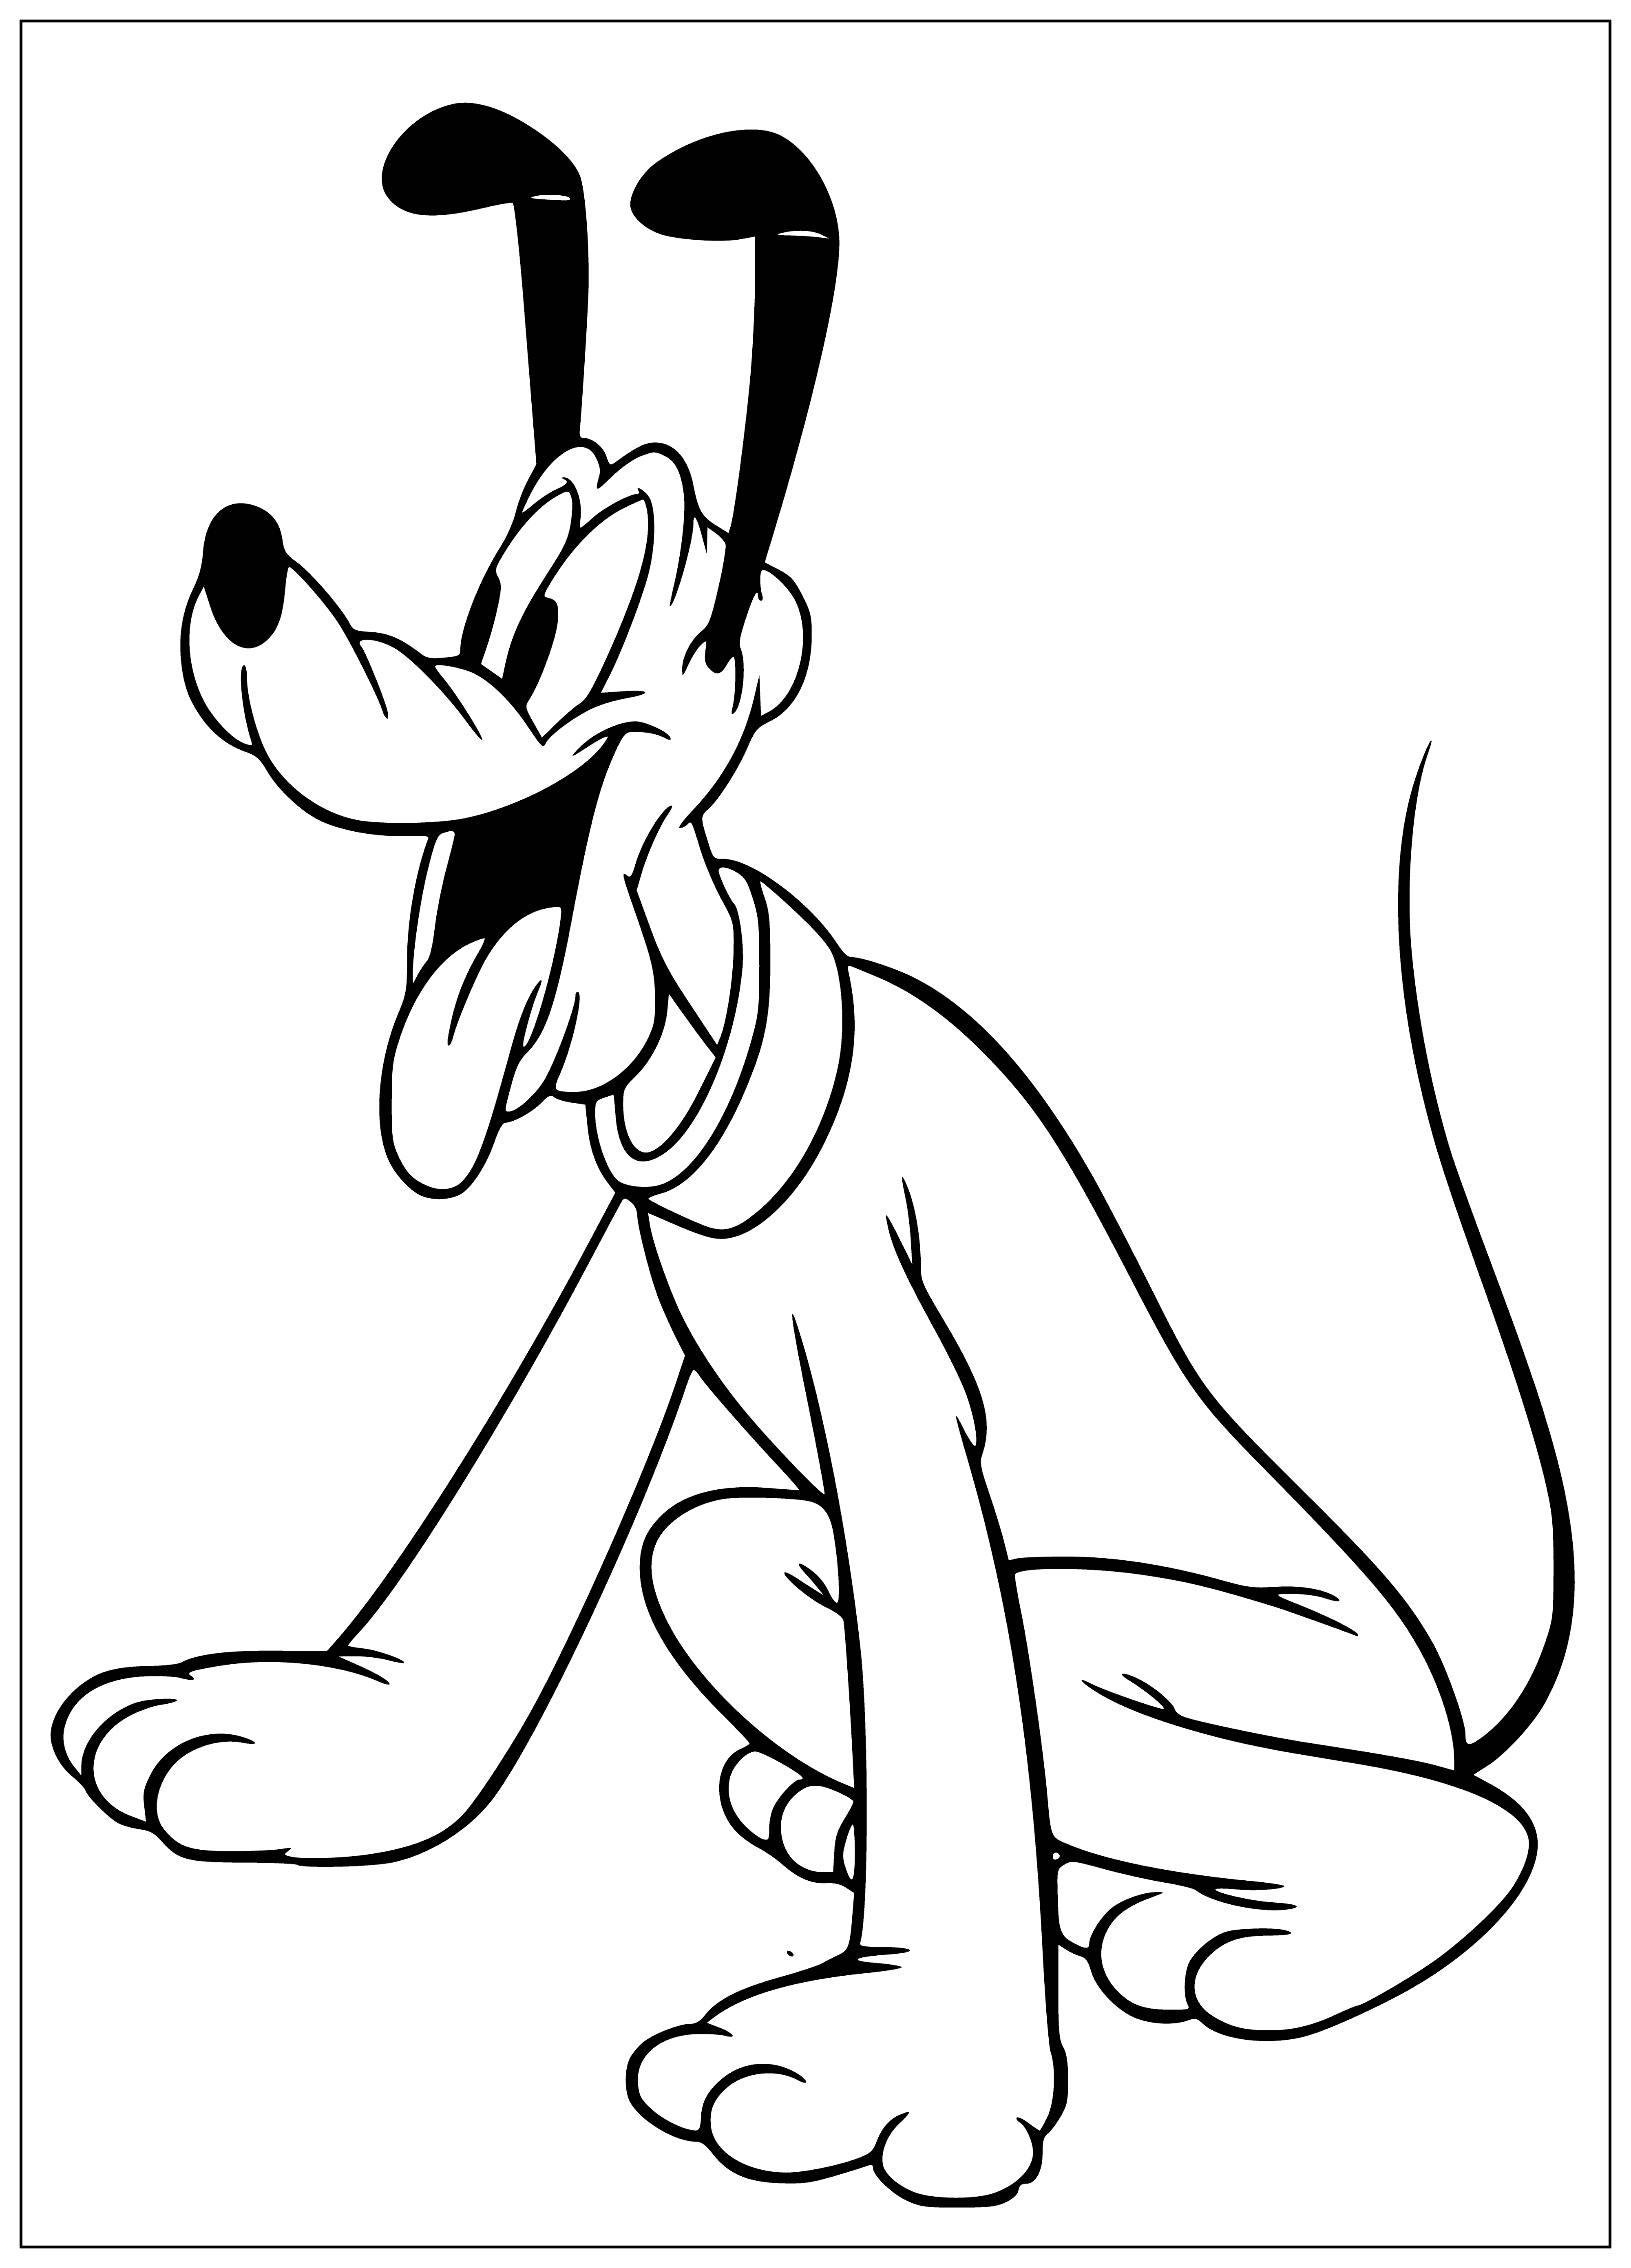 coloring page: A dog sits with big ears, black nose and closed eyes, with a big smile on his face.